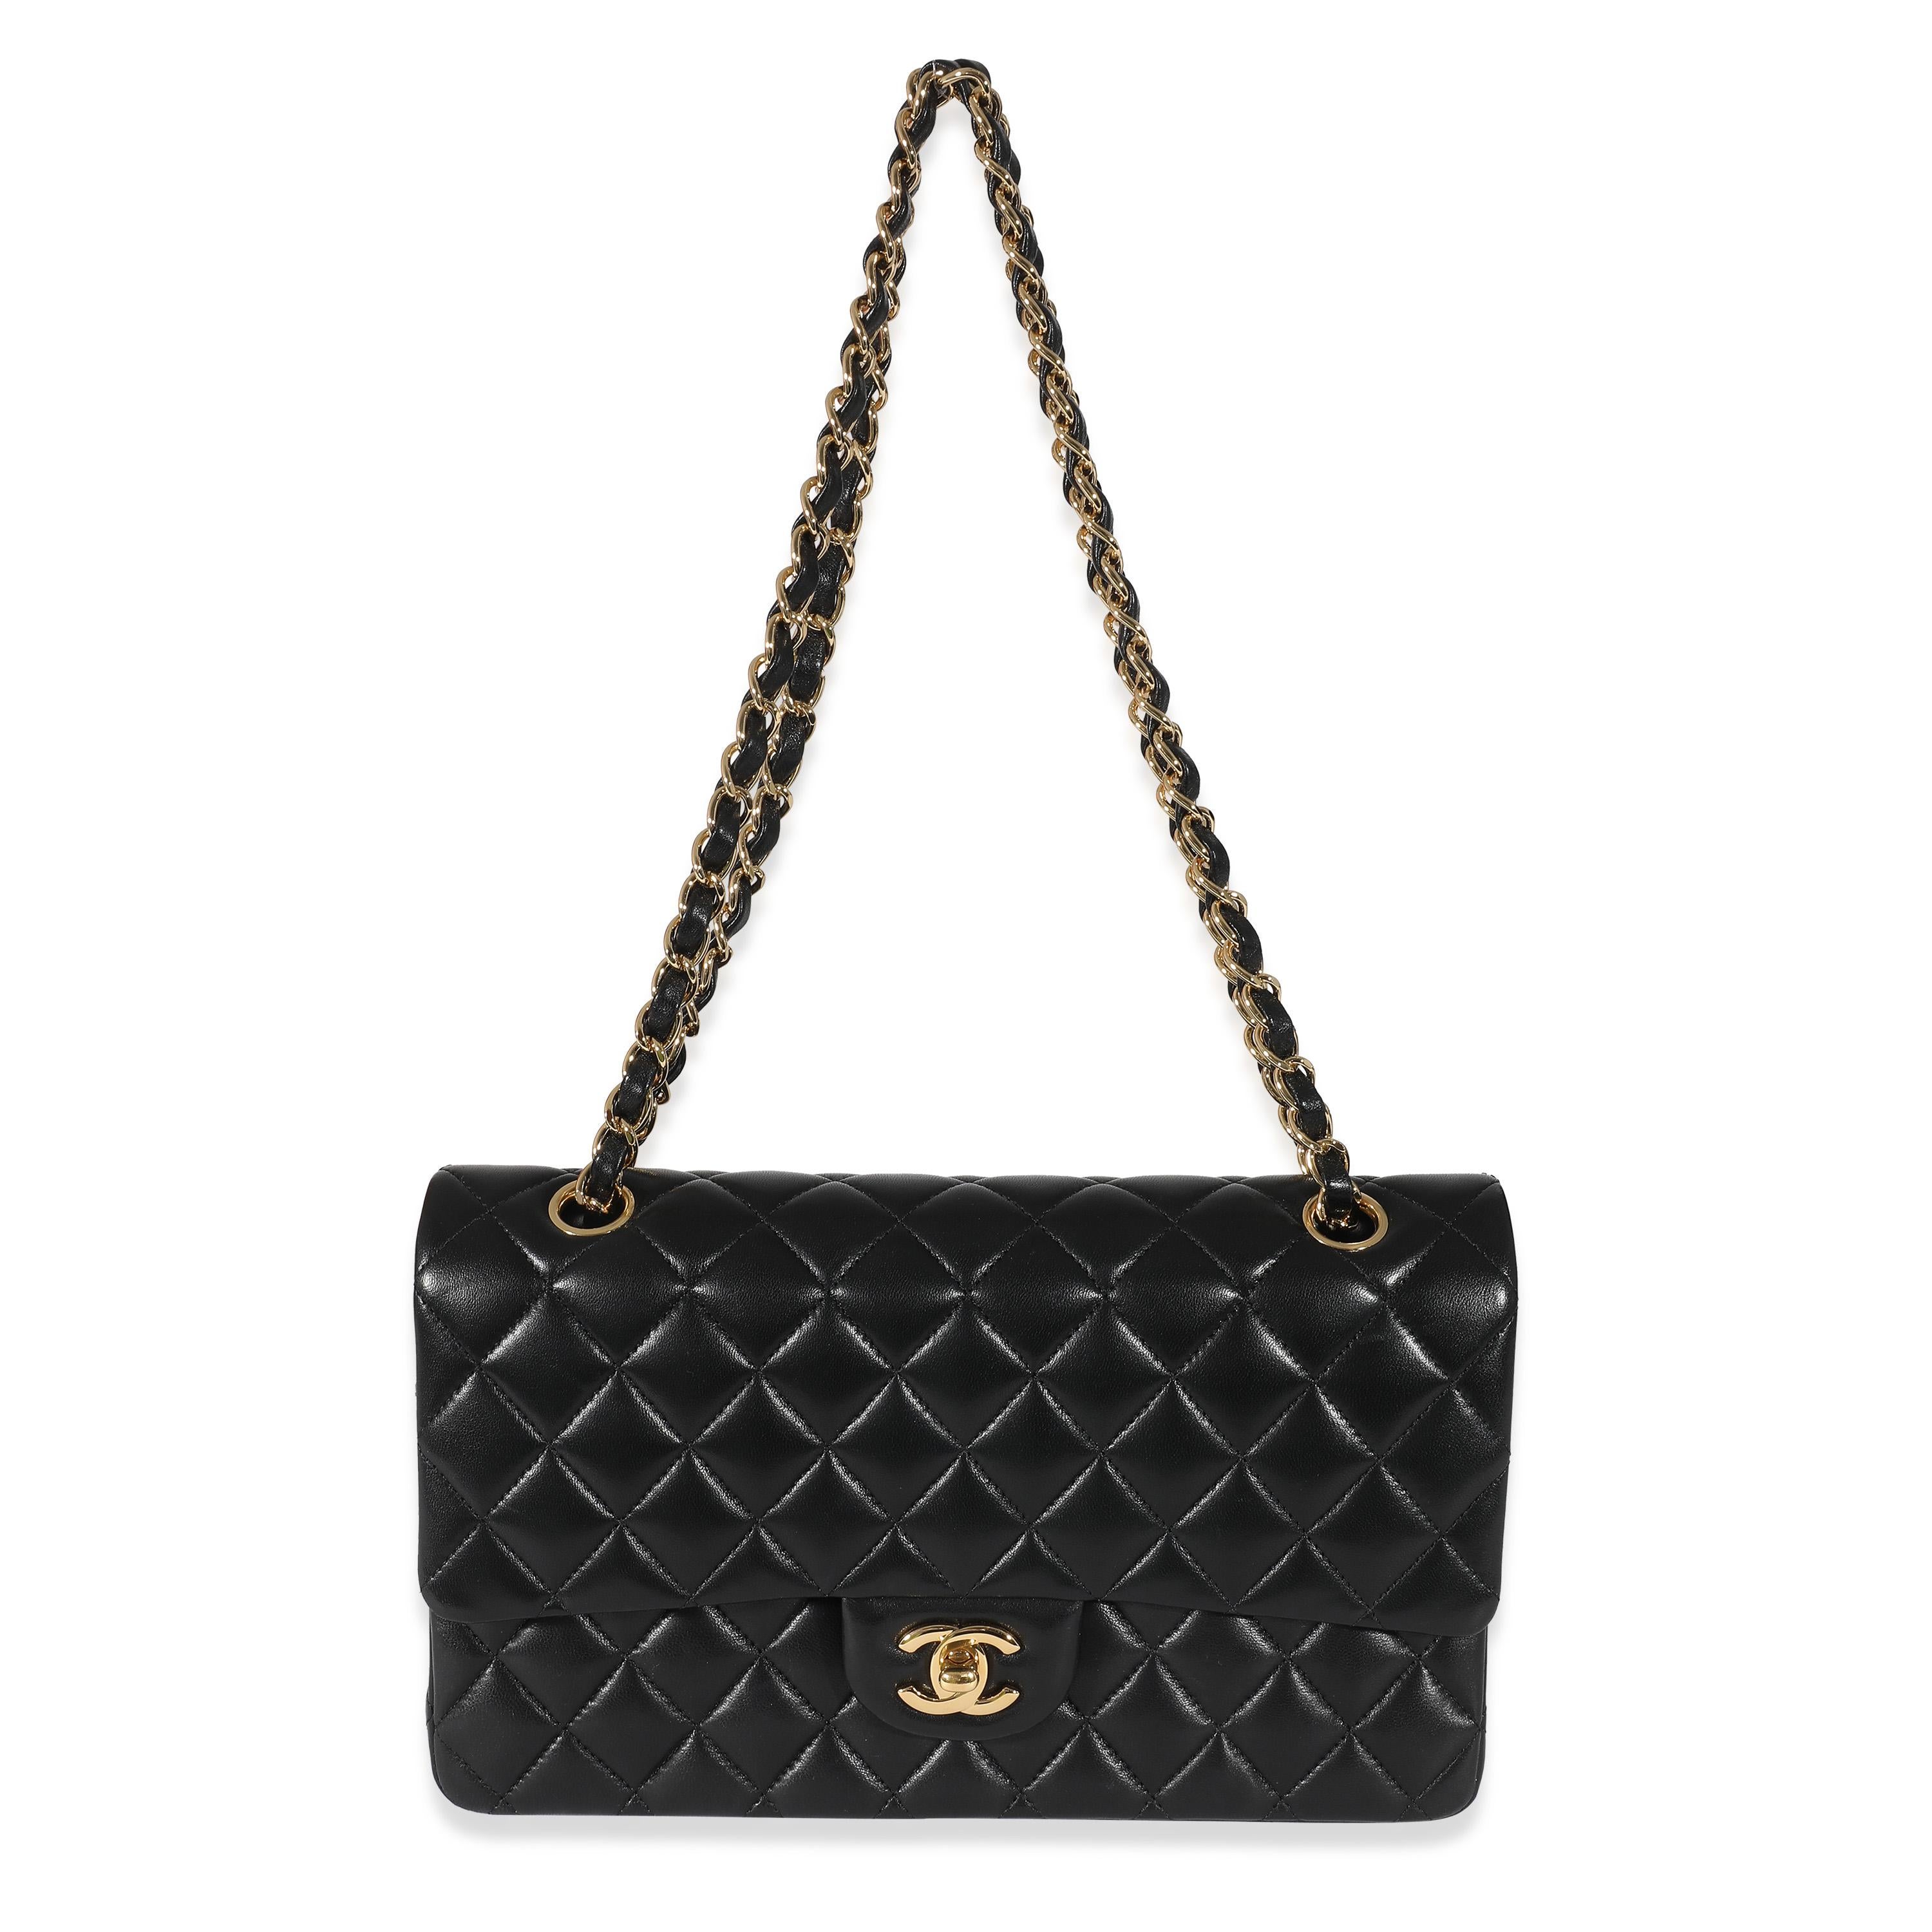 Listing Title: Chanel Black Quilted Lambskin Medium Classic Double Flap Bag
SKU: 134943
MSRP: 10200.00 USD
Condition: Pre-owned 
Handbag Condition: Very Good
Condition Comments: Item is in very good condition with minor signs of wear. Item is in